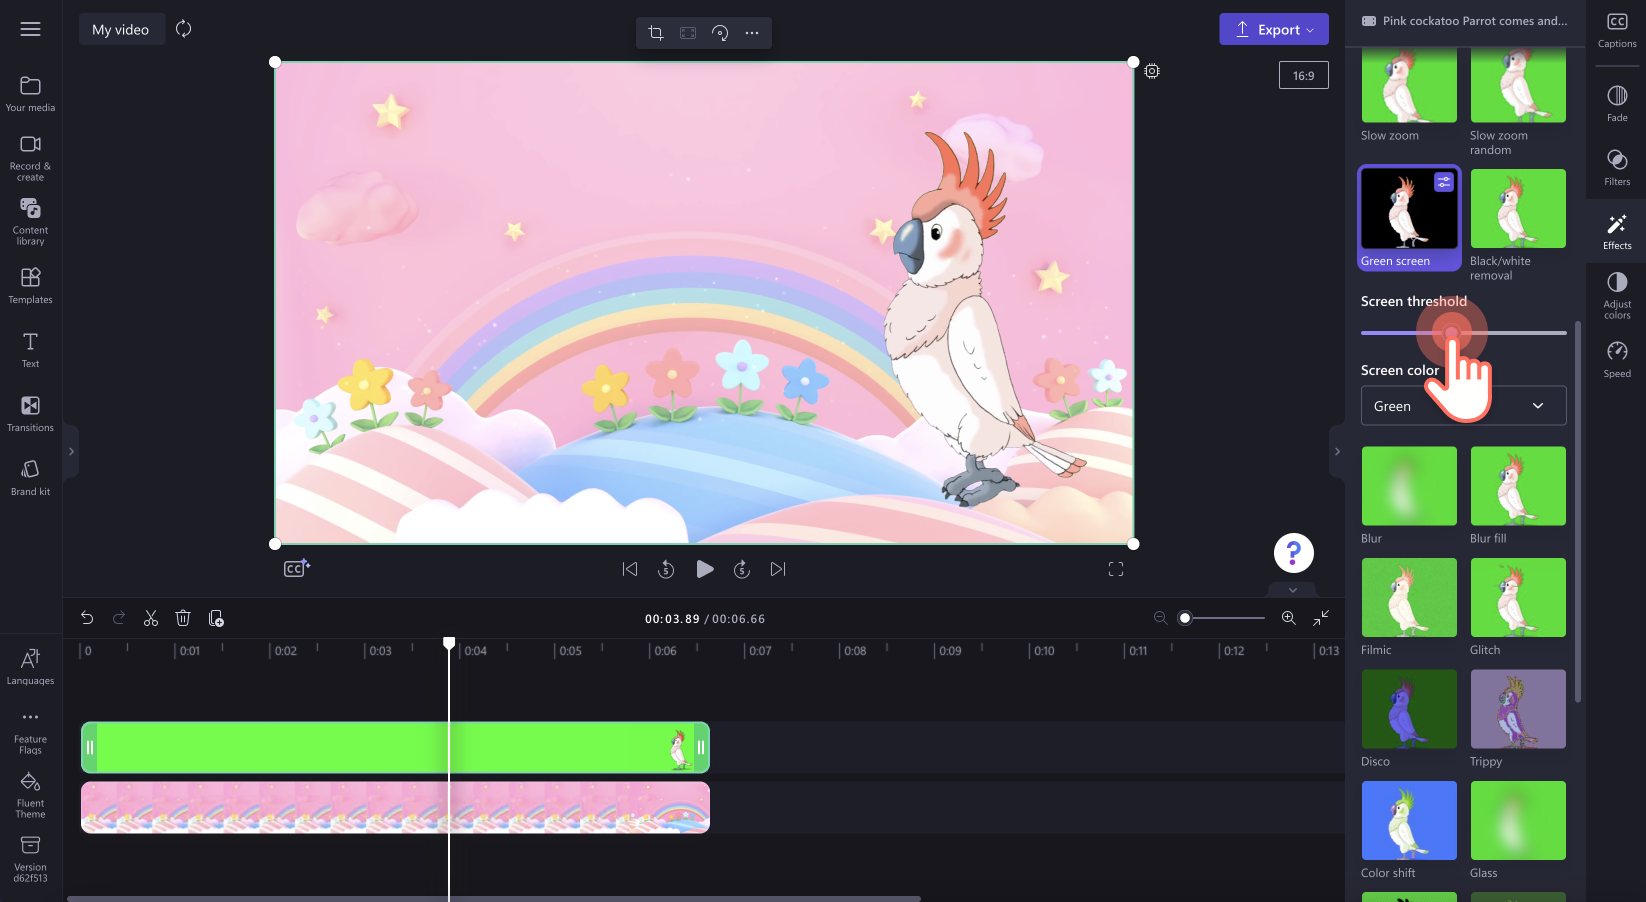 An image of a user editing the green screen threshold with the slider.